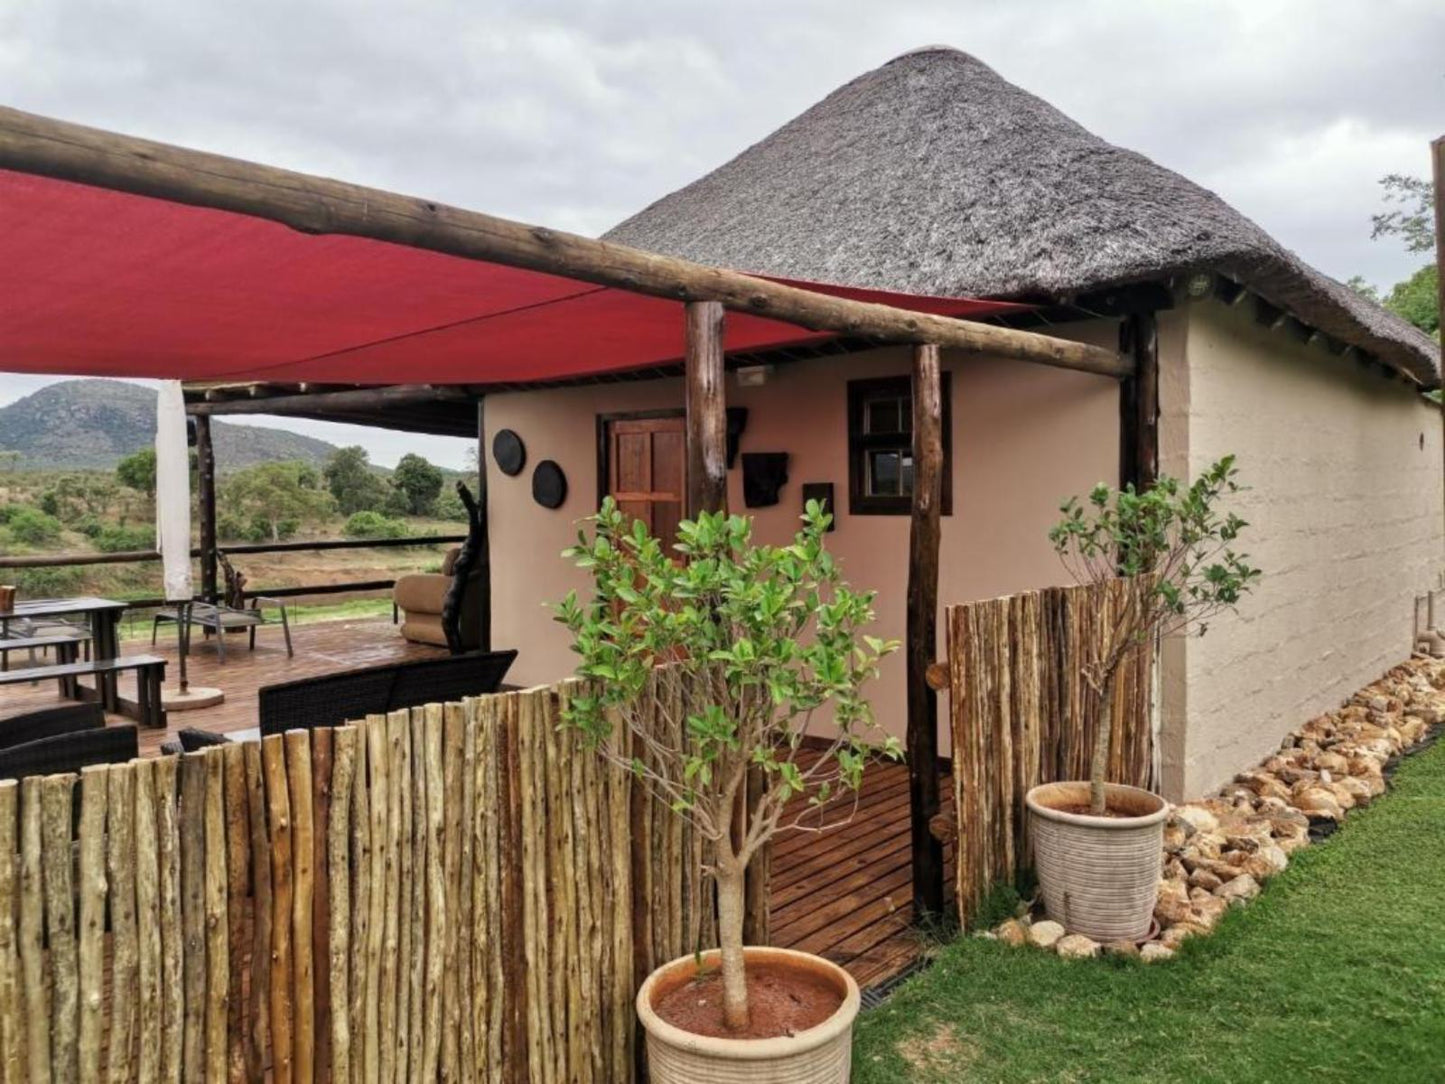 One Bedroom River View Chalet @ Kruger View Chalets